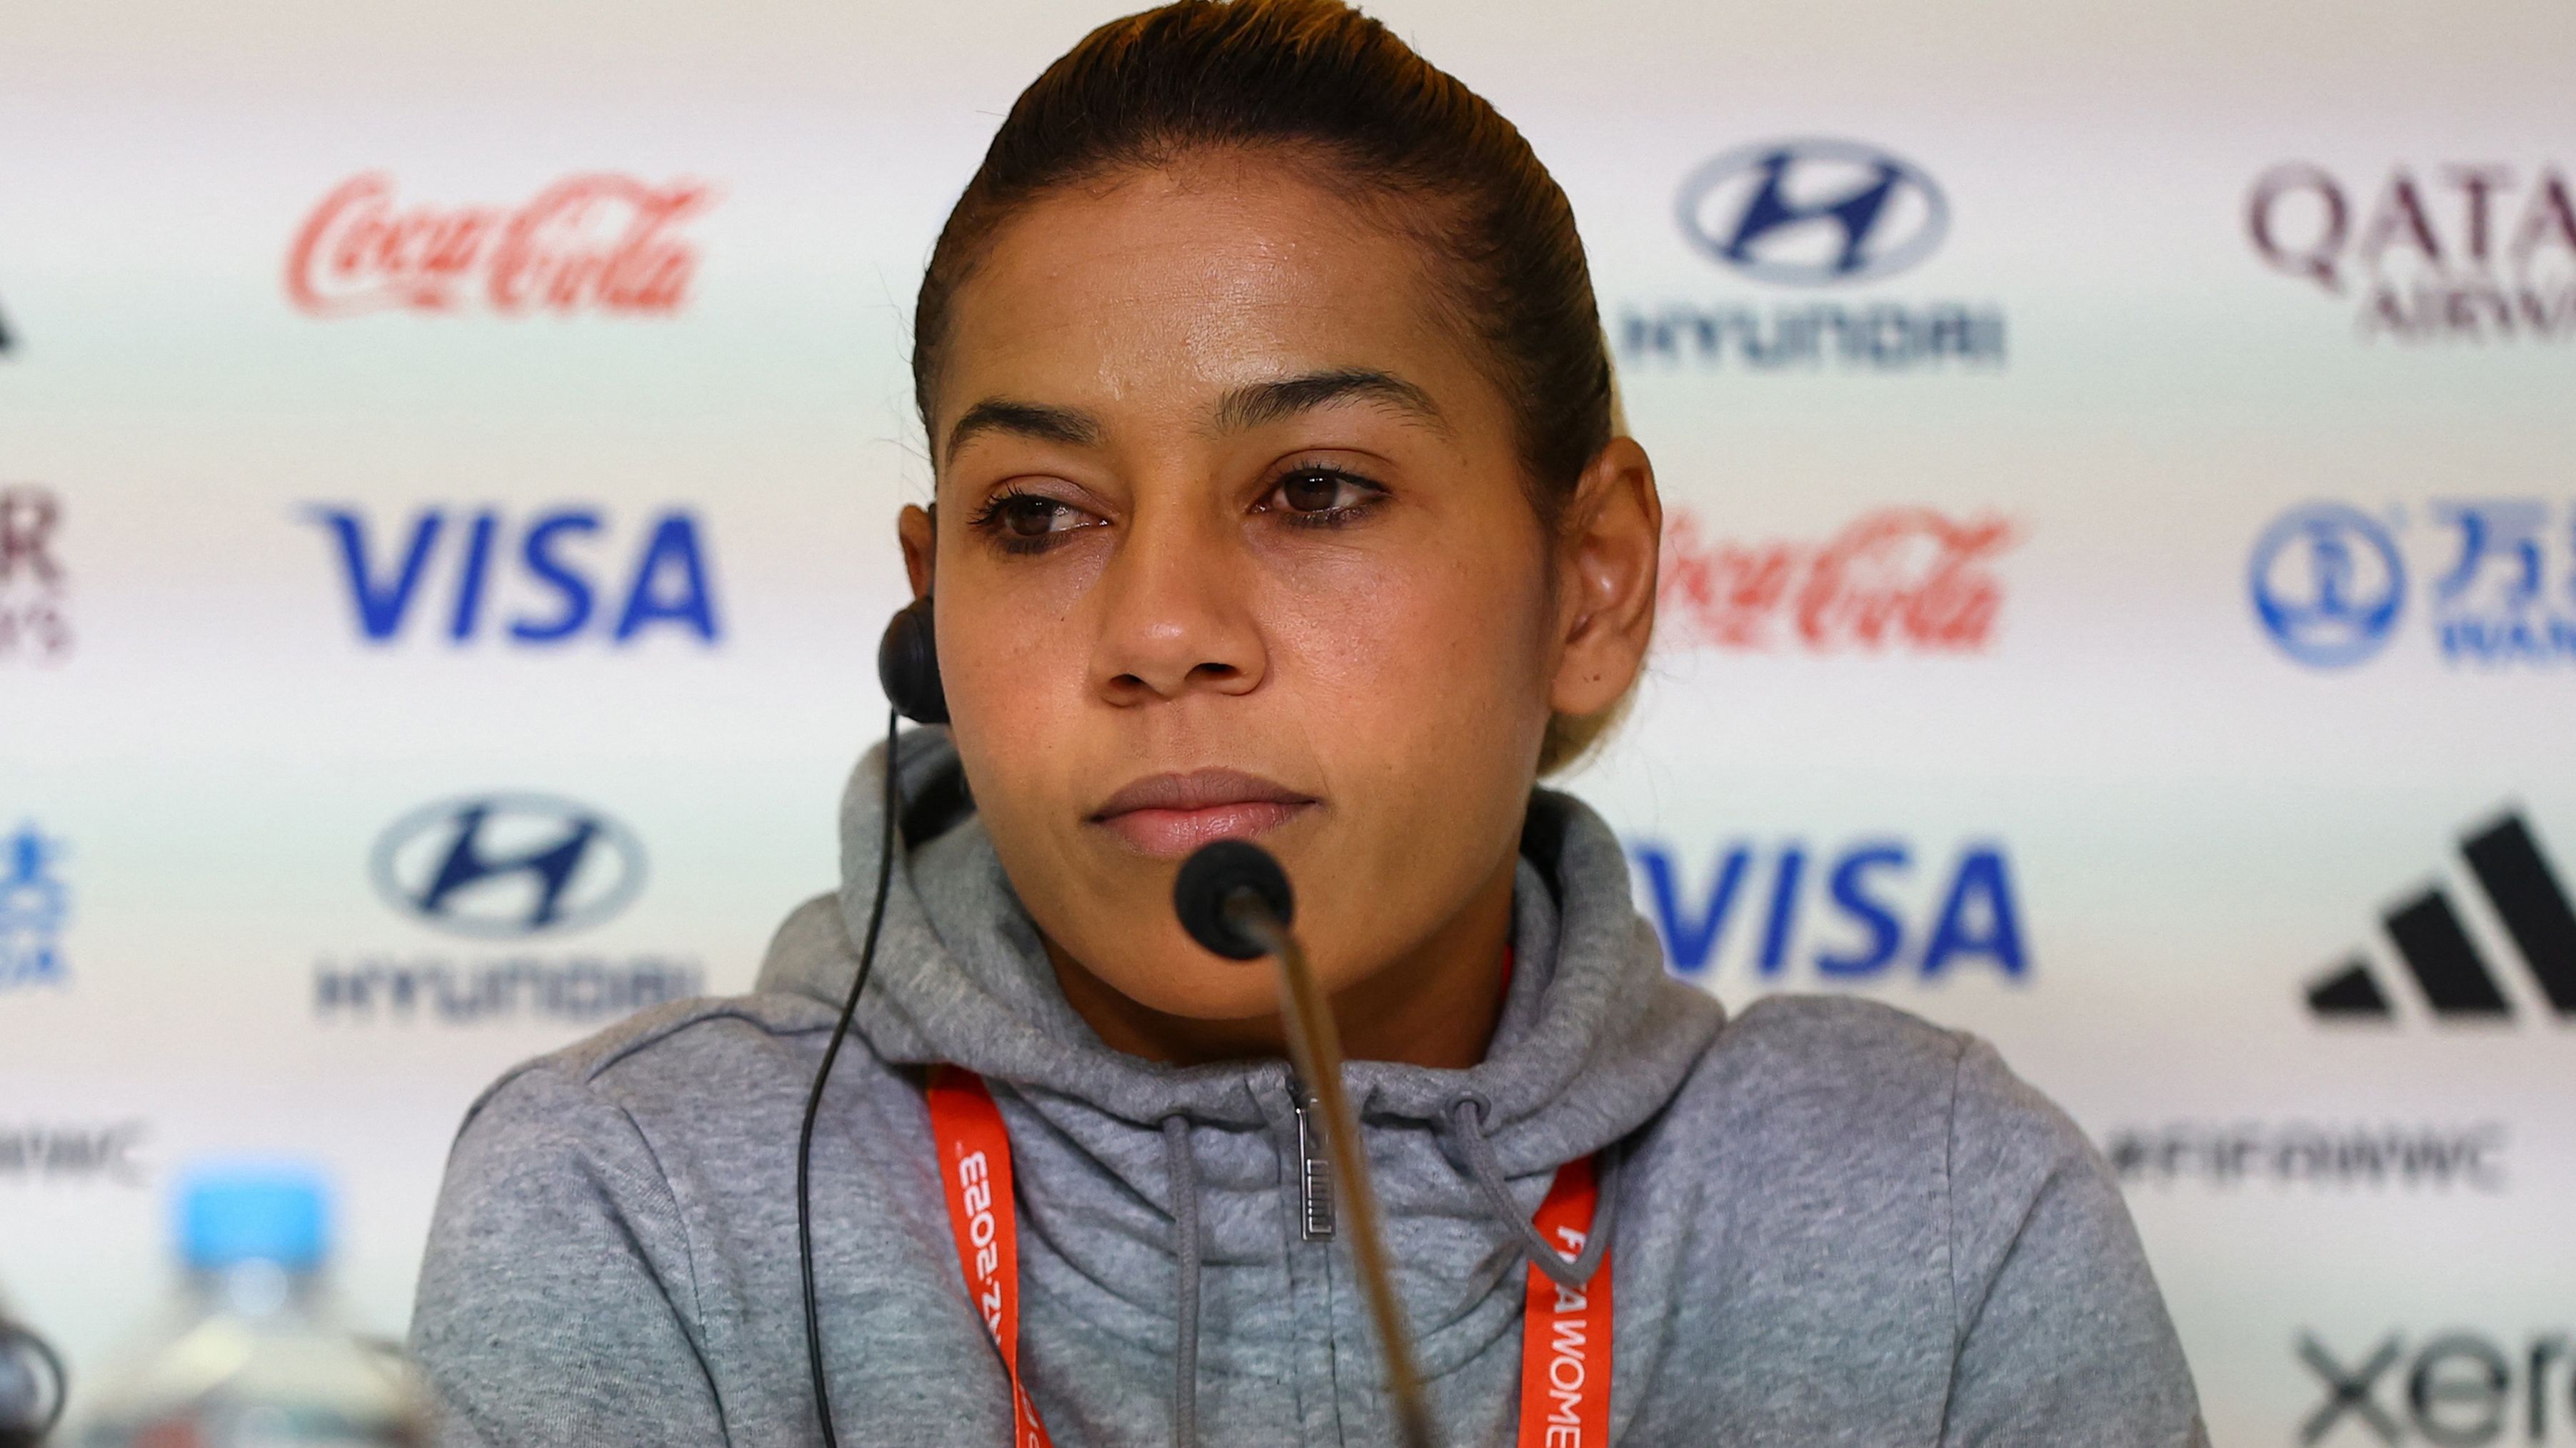 Soccer Football - FIFA Womens World Cup Australia and New Zealand 2023 - Morocco Press Conference - Melbourne Rectangular Stadium, Melbourne, Australia - July 23, 2023 Morocco&#x27;s Ghizlane Chebbak during the press conference REUTERS/Hannah Mckay